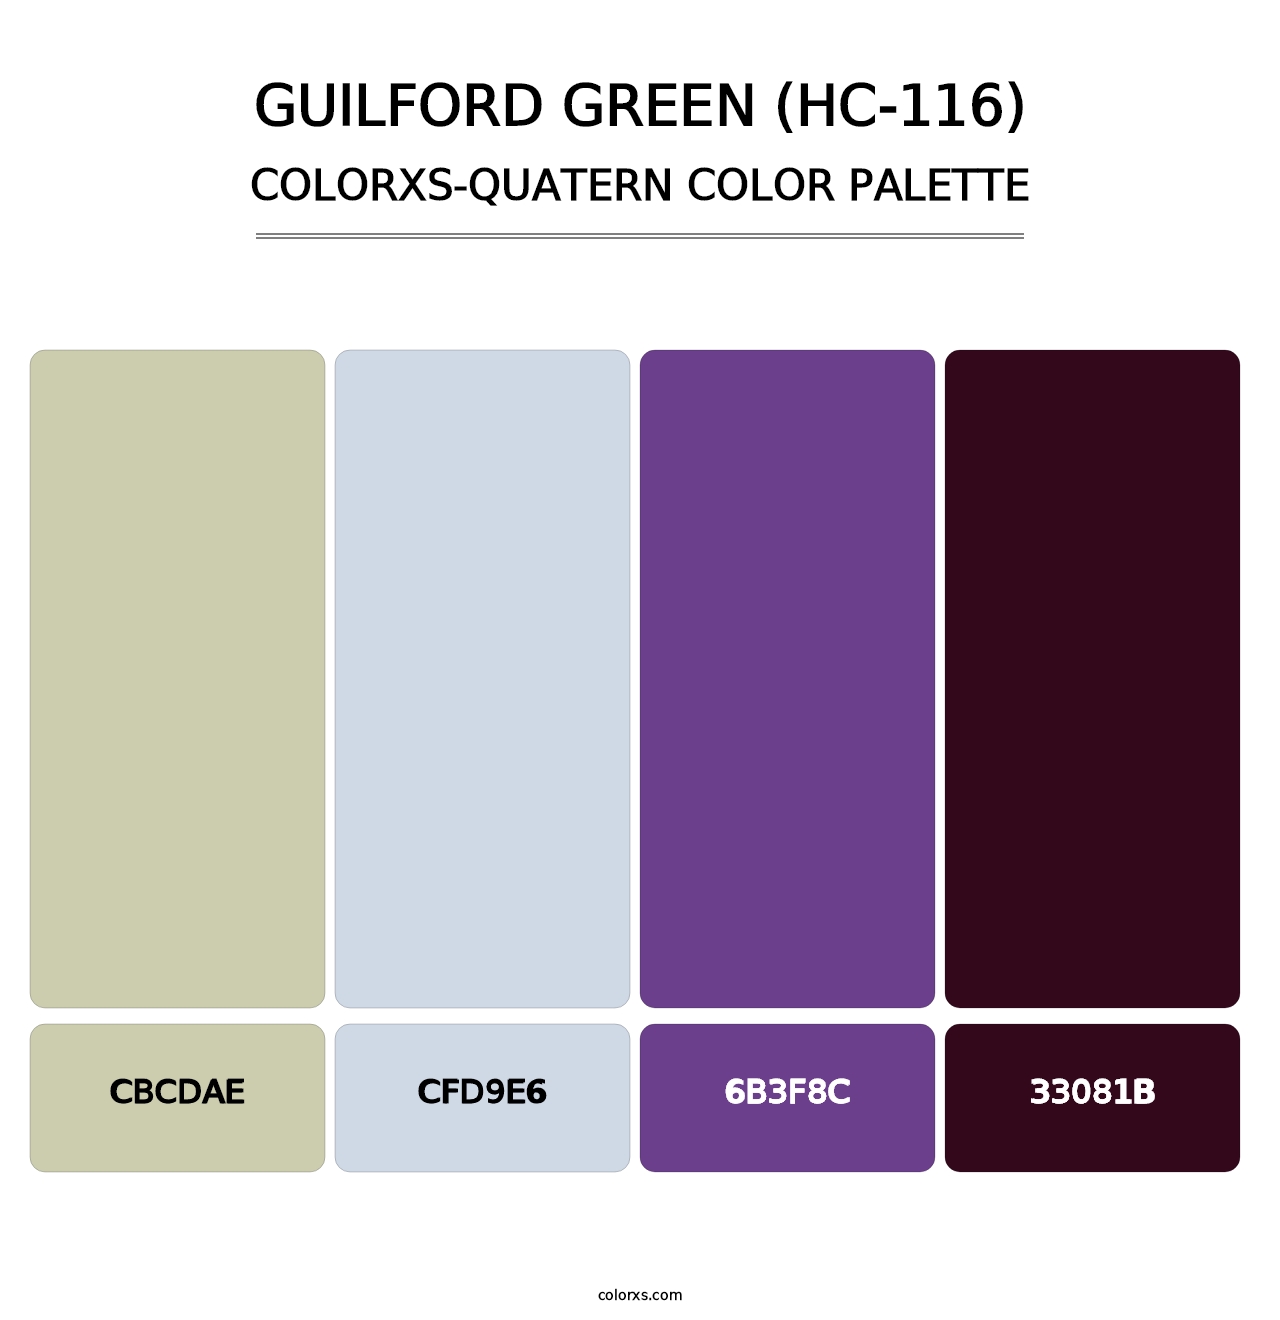 Guilford Green (HC-116) - Colorxs Quatern Palette